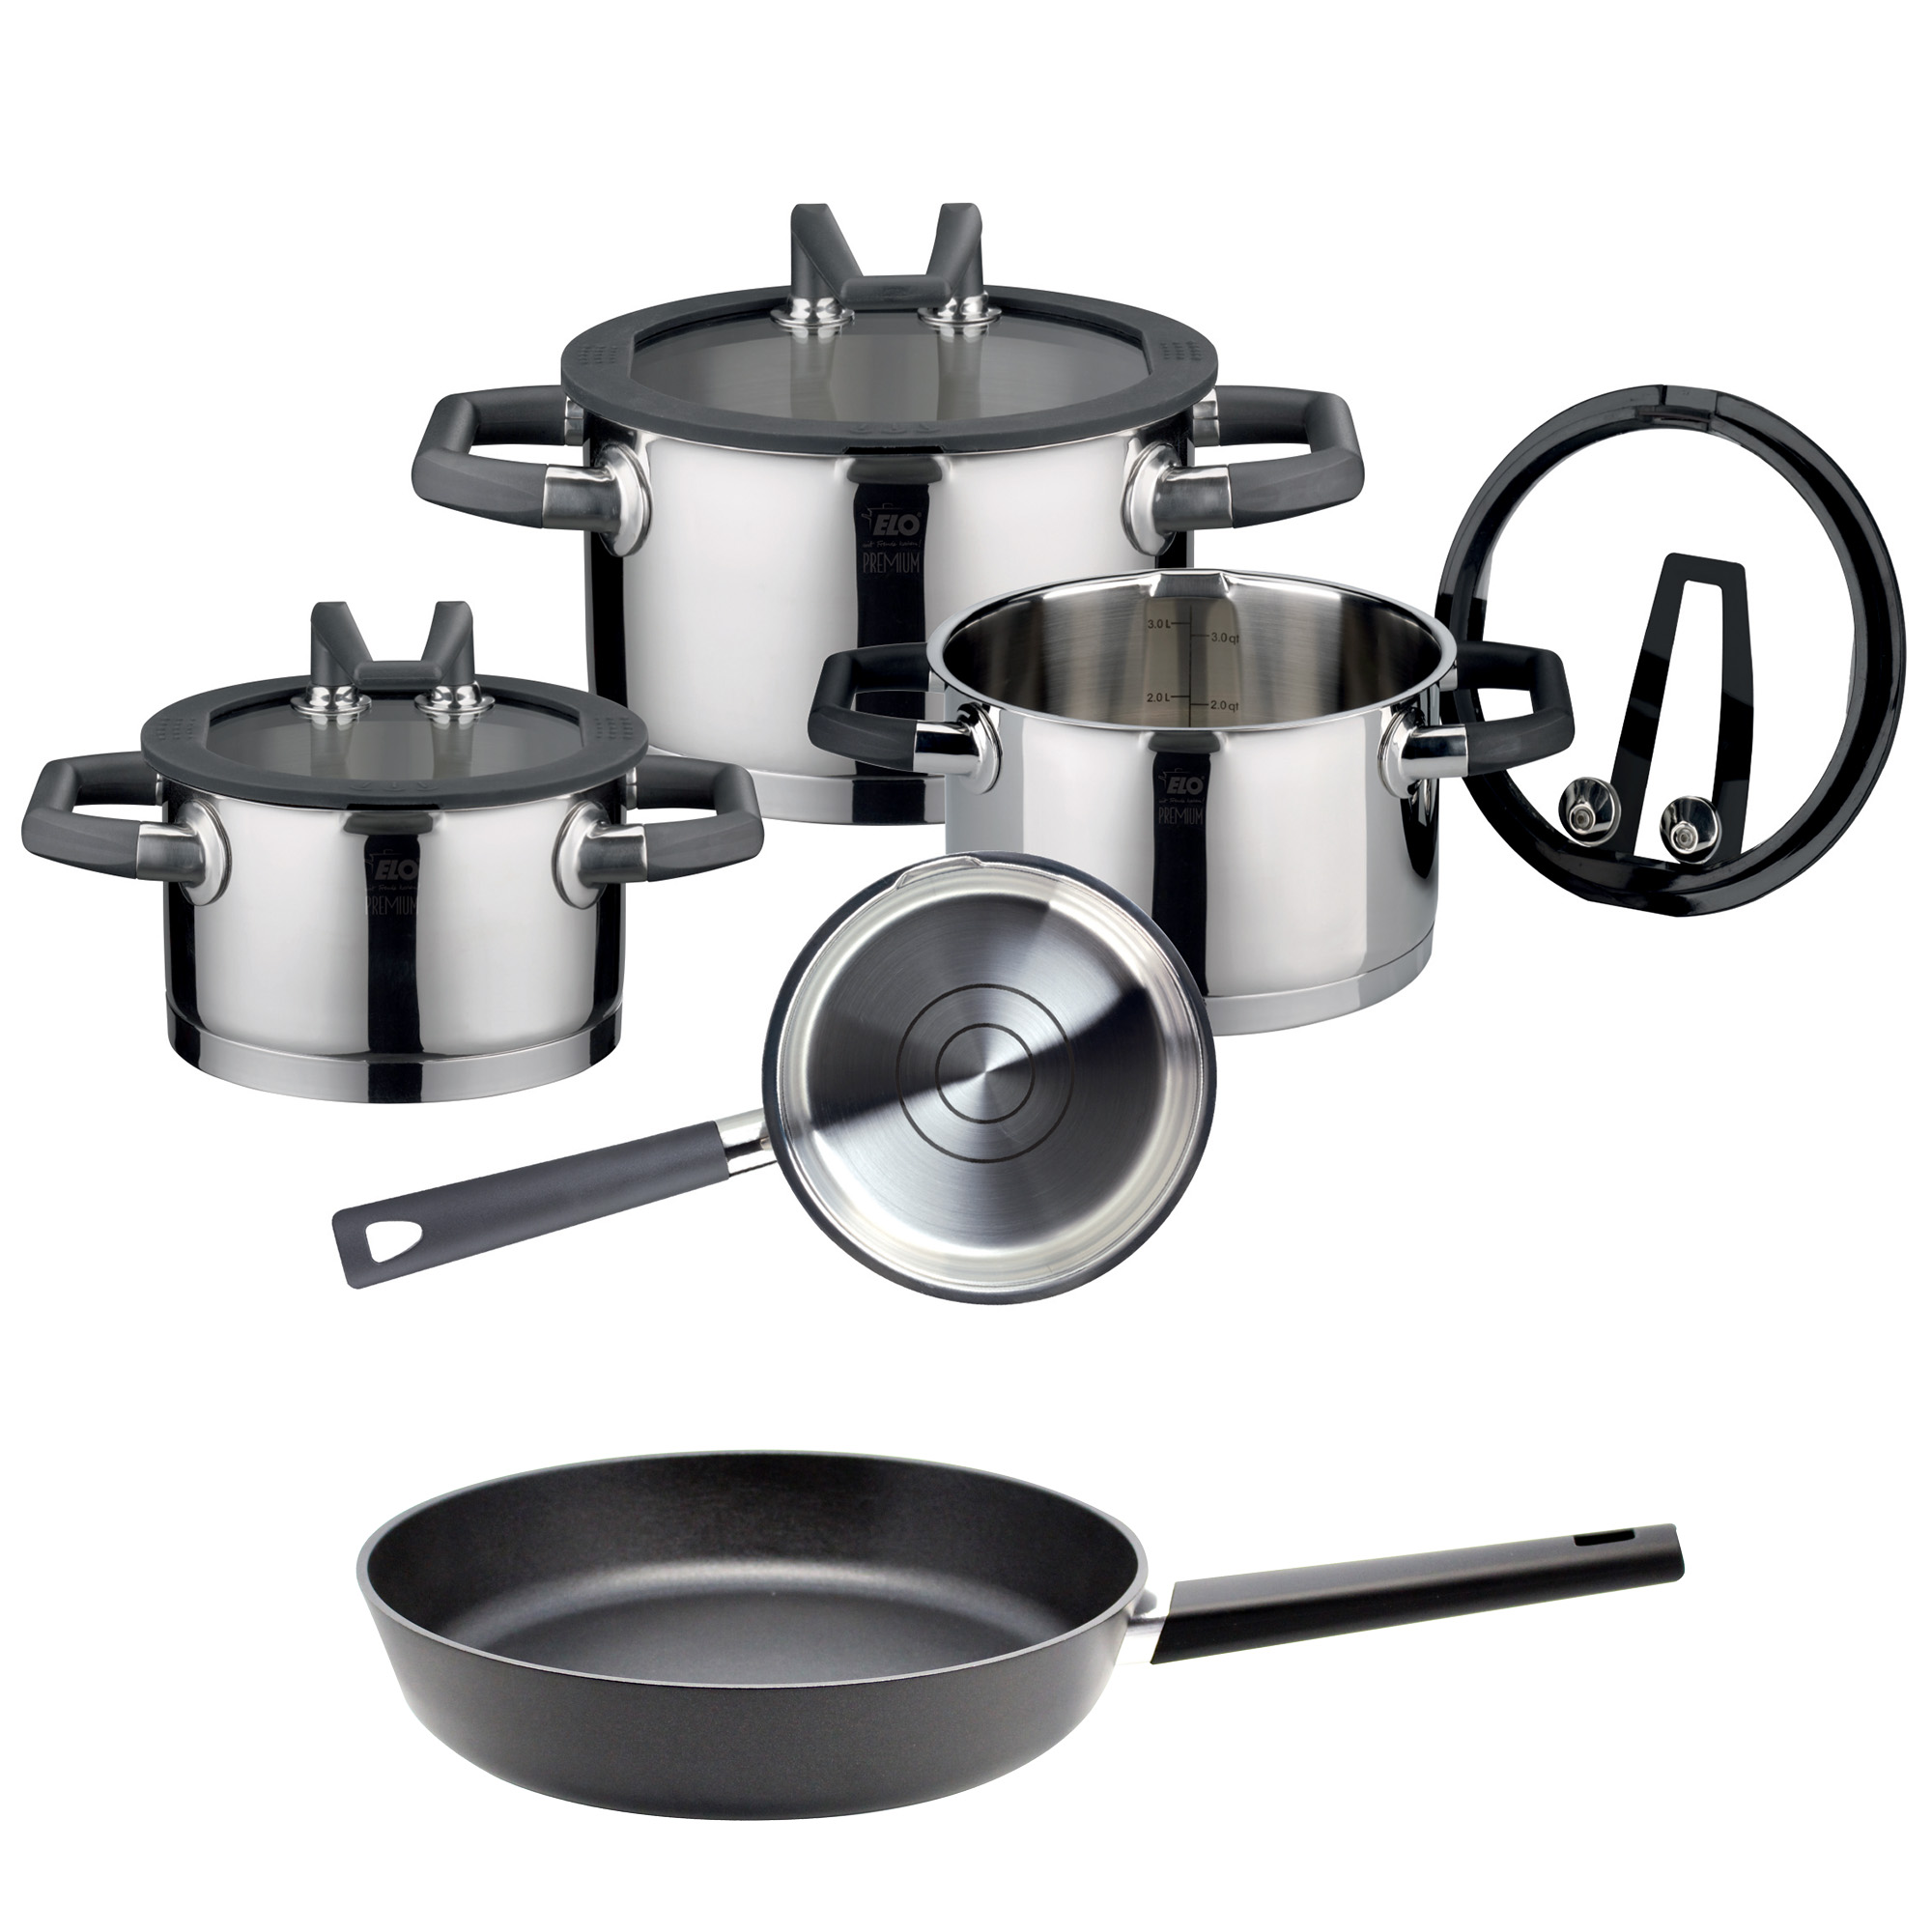 ELO Premium Black Pearl Stainless Steel 7-Piece Pots and Pans Induction Cookware Set with Easy-Pour Rim Integrated Measuring Scale and Heat-Resistant Handles Patented Stand-by Lids